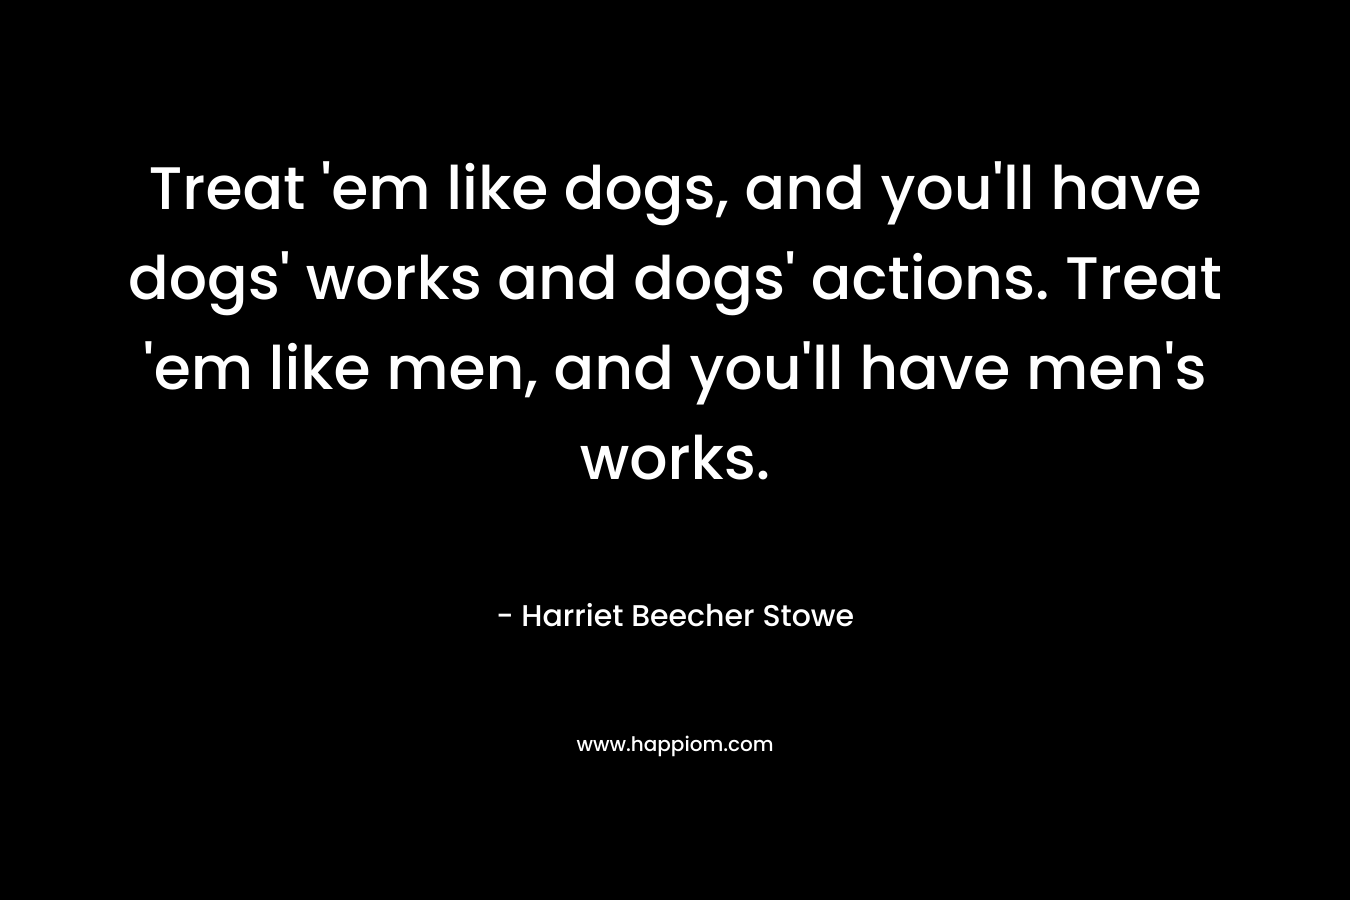 Treat ’em like dogs, and you’ll have dogs’ works and dogs’ actions. Treat ’em like men, and you’ll have men’s works. – Harriet Beecher Stowe